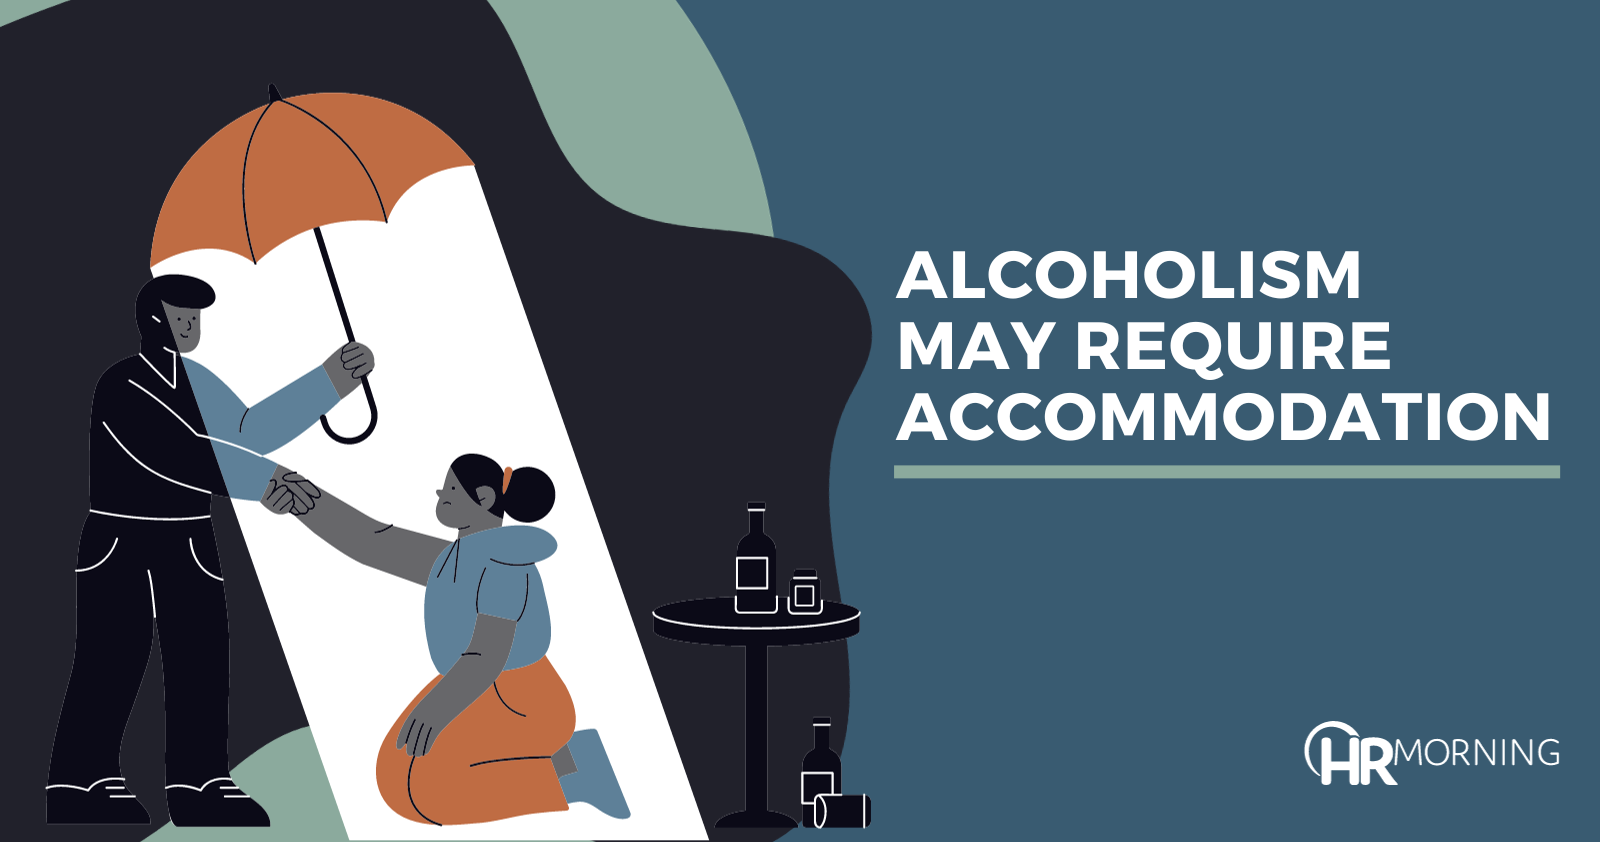 Alcoholism may require accommodation